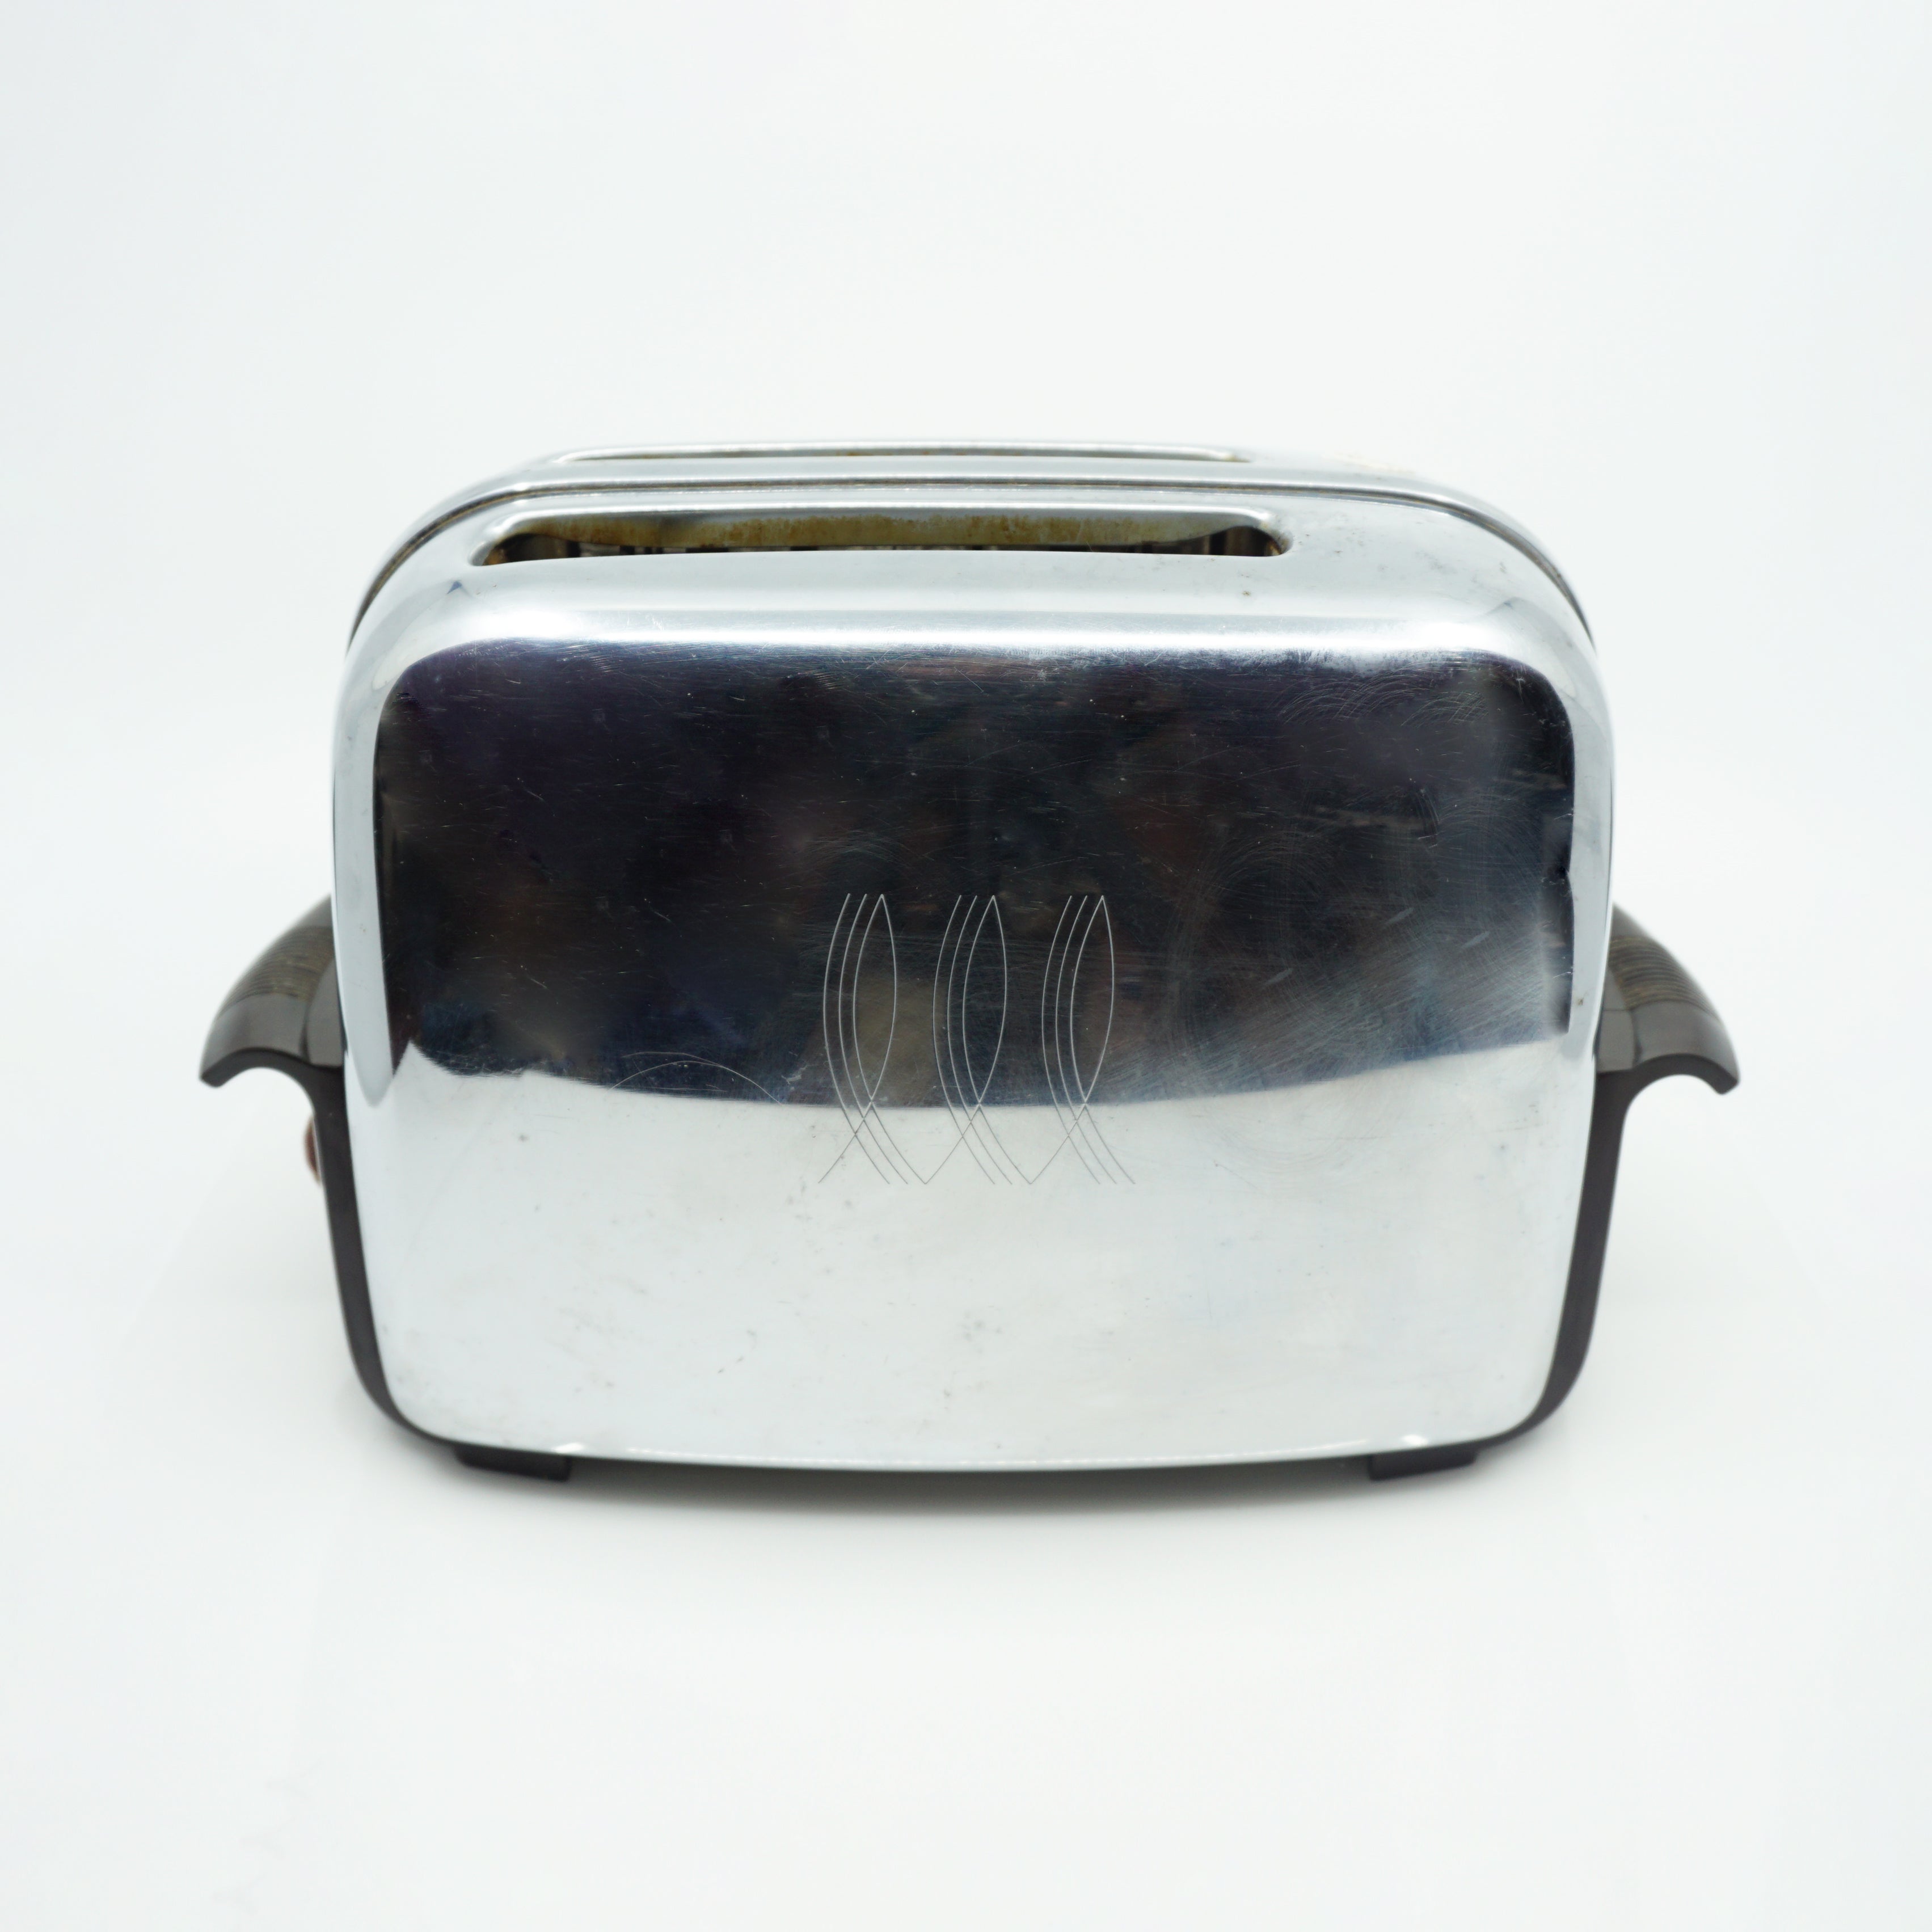 Art Deco c. 1950s TOASTMASTER 2-Slice Toaster Model 1B14. Made in USA. –  Sustainable Deco, Inc.